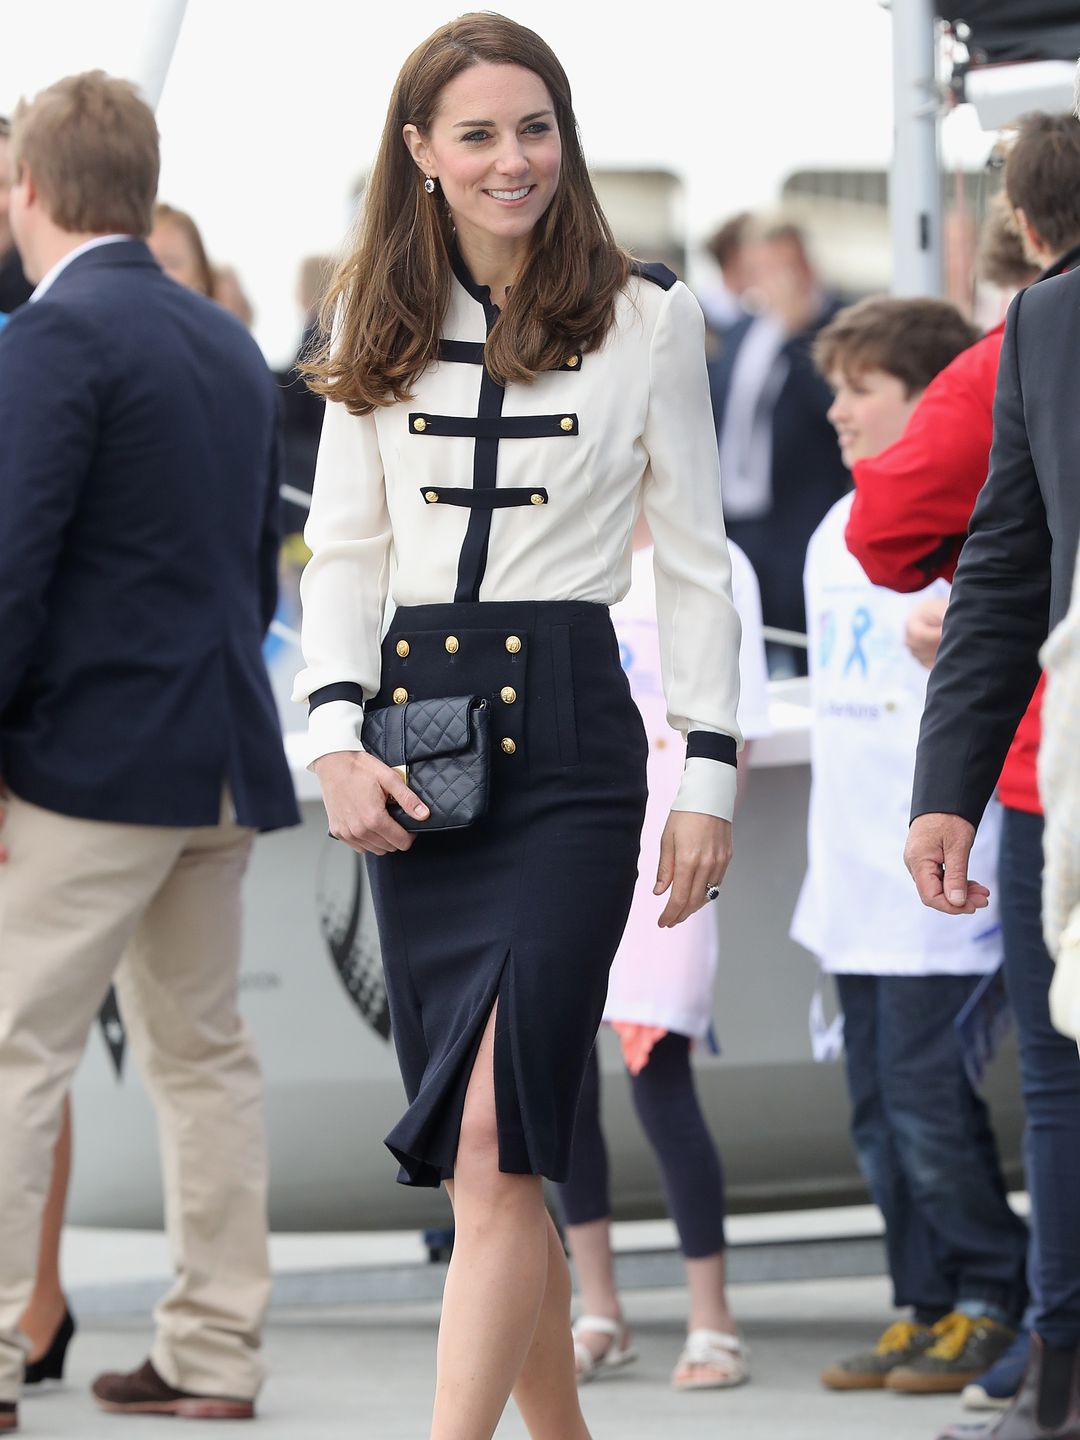 Catherine, Duchess of Cambridge, patron of the 1851 Trust, arrives at Land Rover BAR on May 20, 2016 in Alexander McQueen